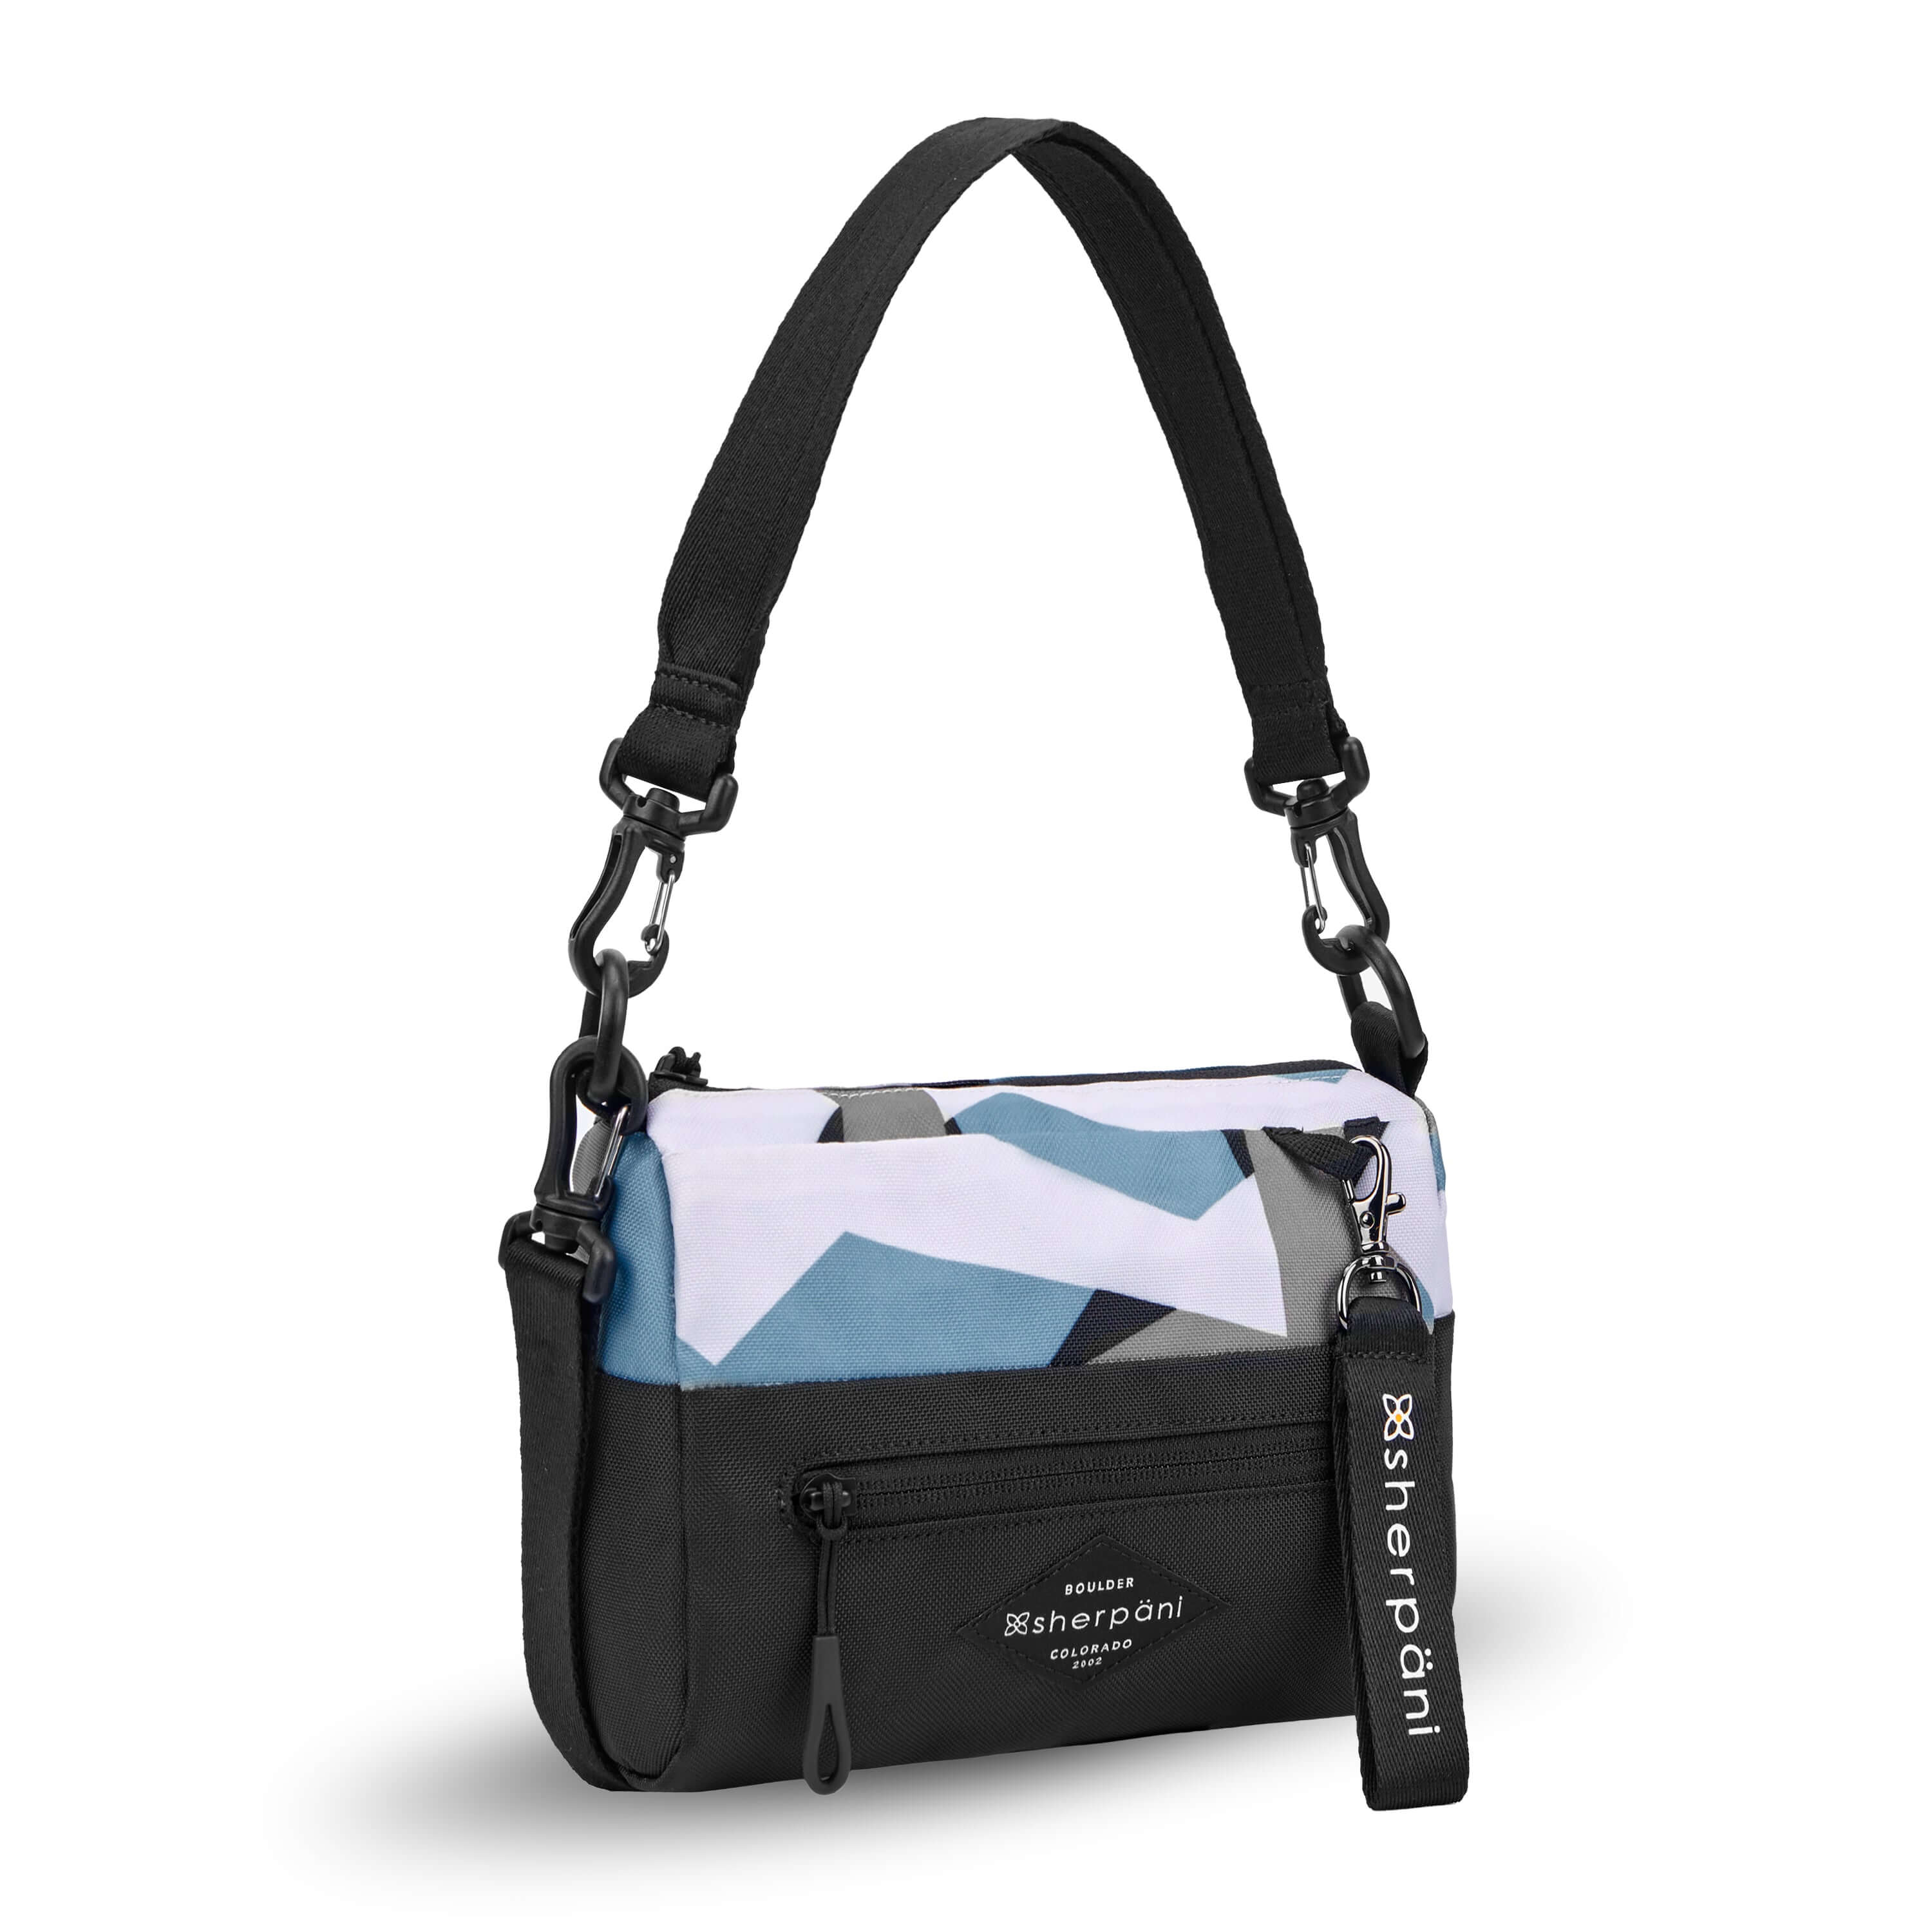 Angled front view of Sherpani's purse, the Skye in Summer Camo. It is two toned, the top half of the bag is a camouflage pattern of white, gray and blue and the bottom half of the bag is black. There is an external zipper compartment with an easy pull zipper accented in black. There is a branded Sherpani keychain clipped to the upper right corner. The bag has a detachable short strap and a longer detachable/adjustable crossbody strap. #color_summer camo